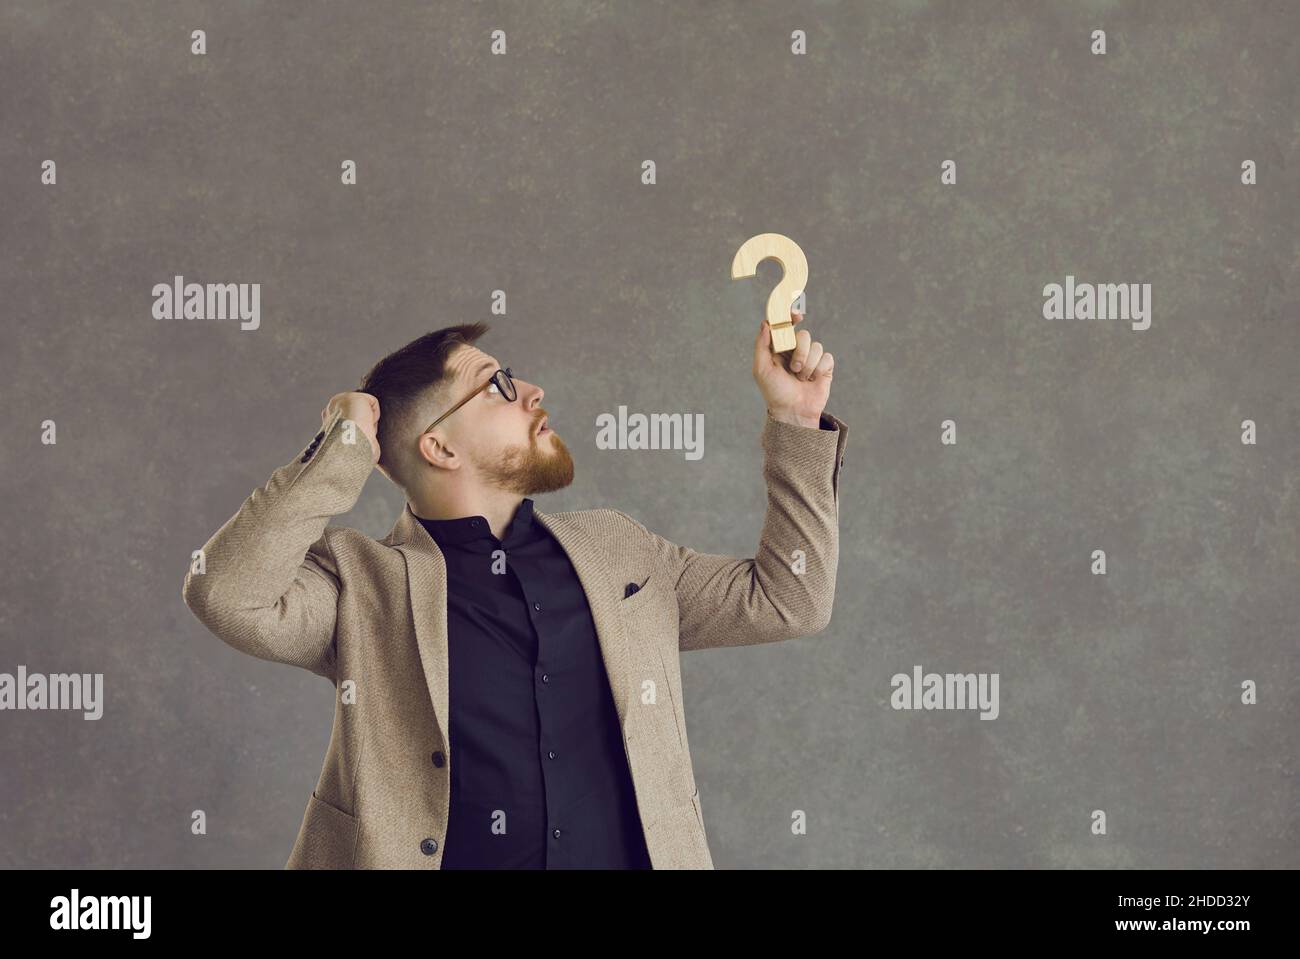 Confused businessman holding a question mark and thinking of an answer to a question Stock Photo